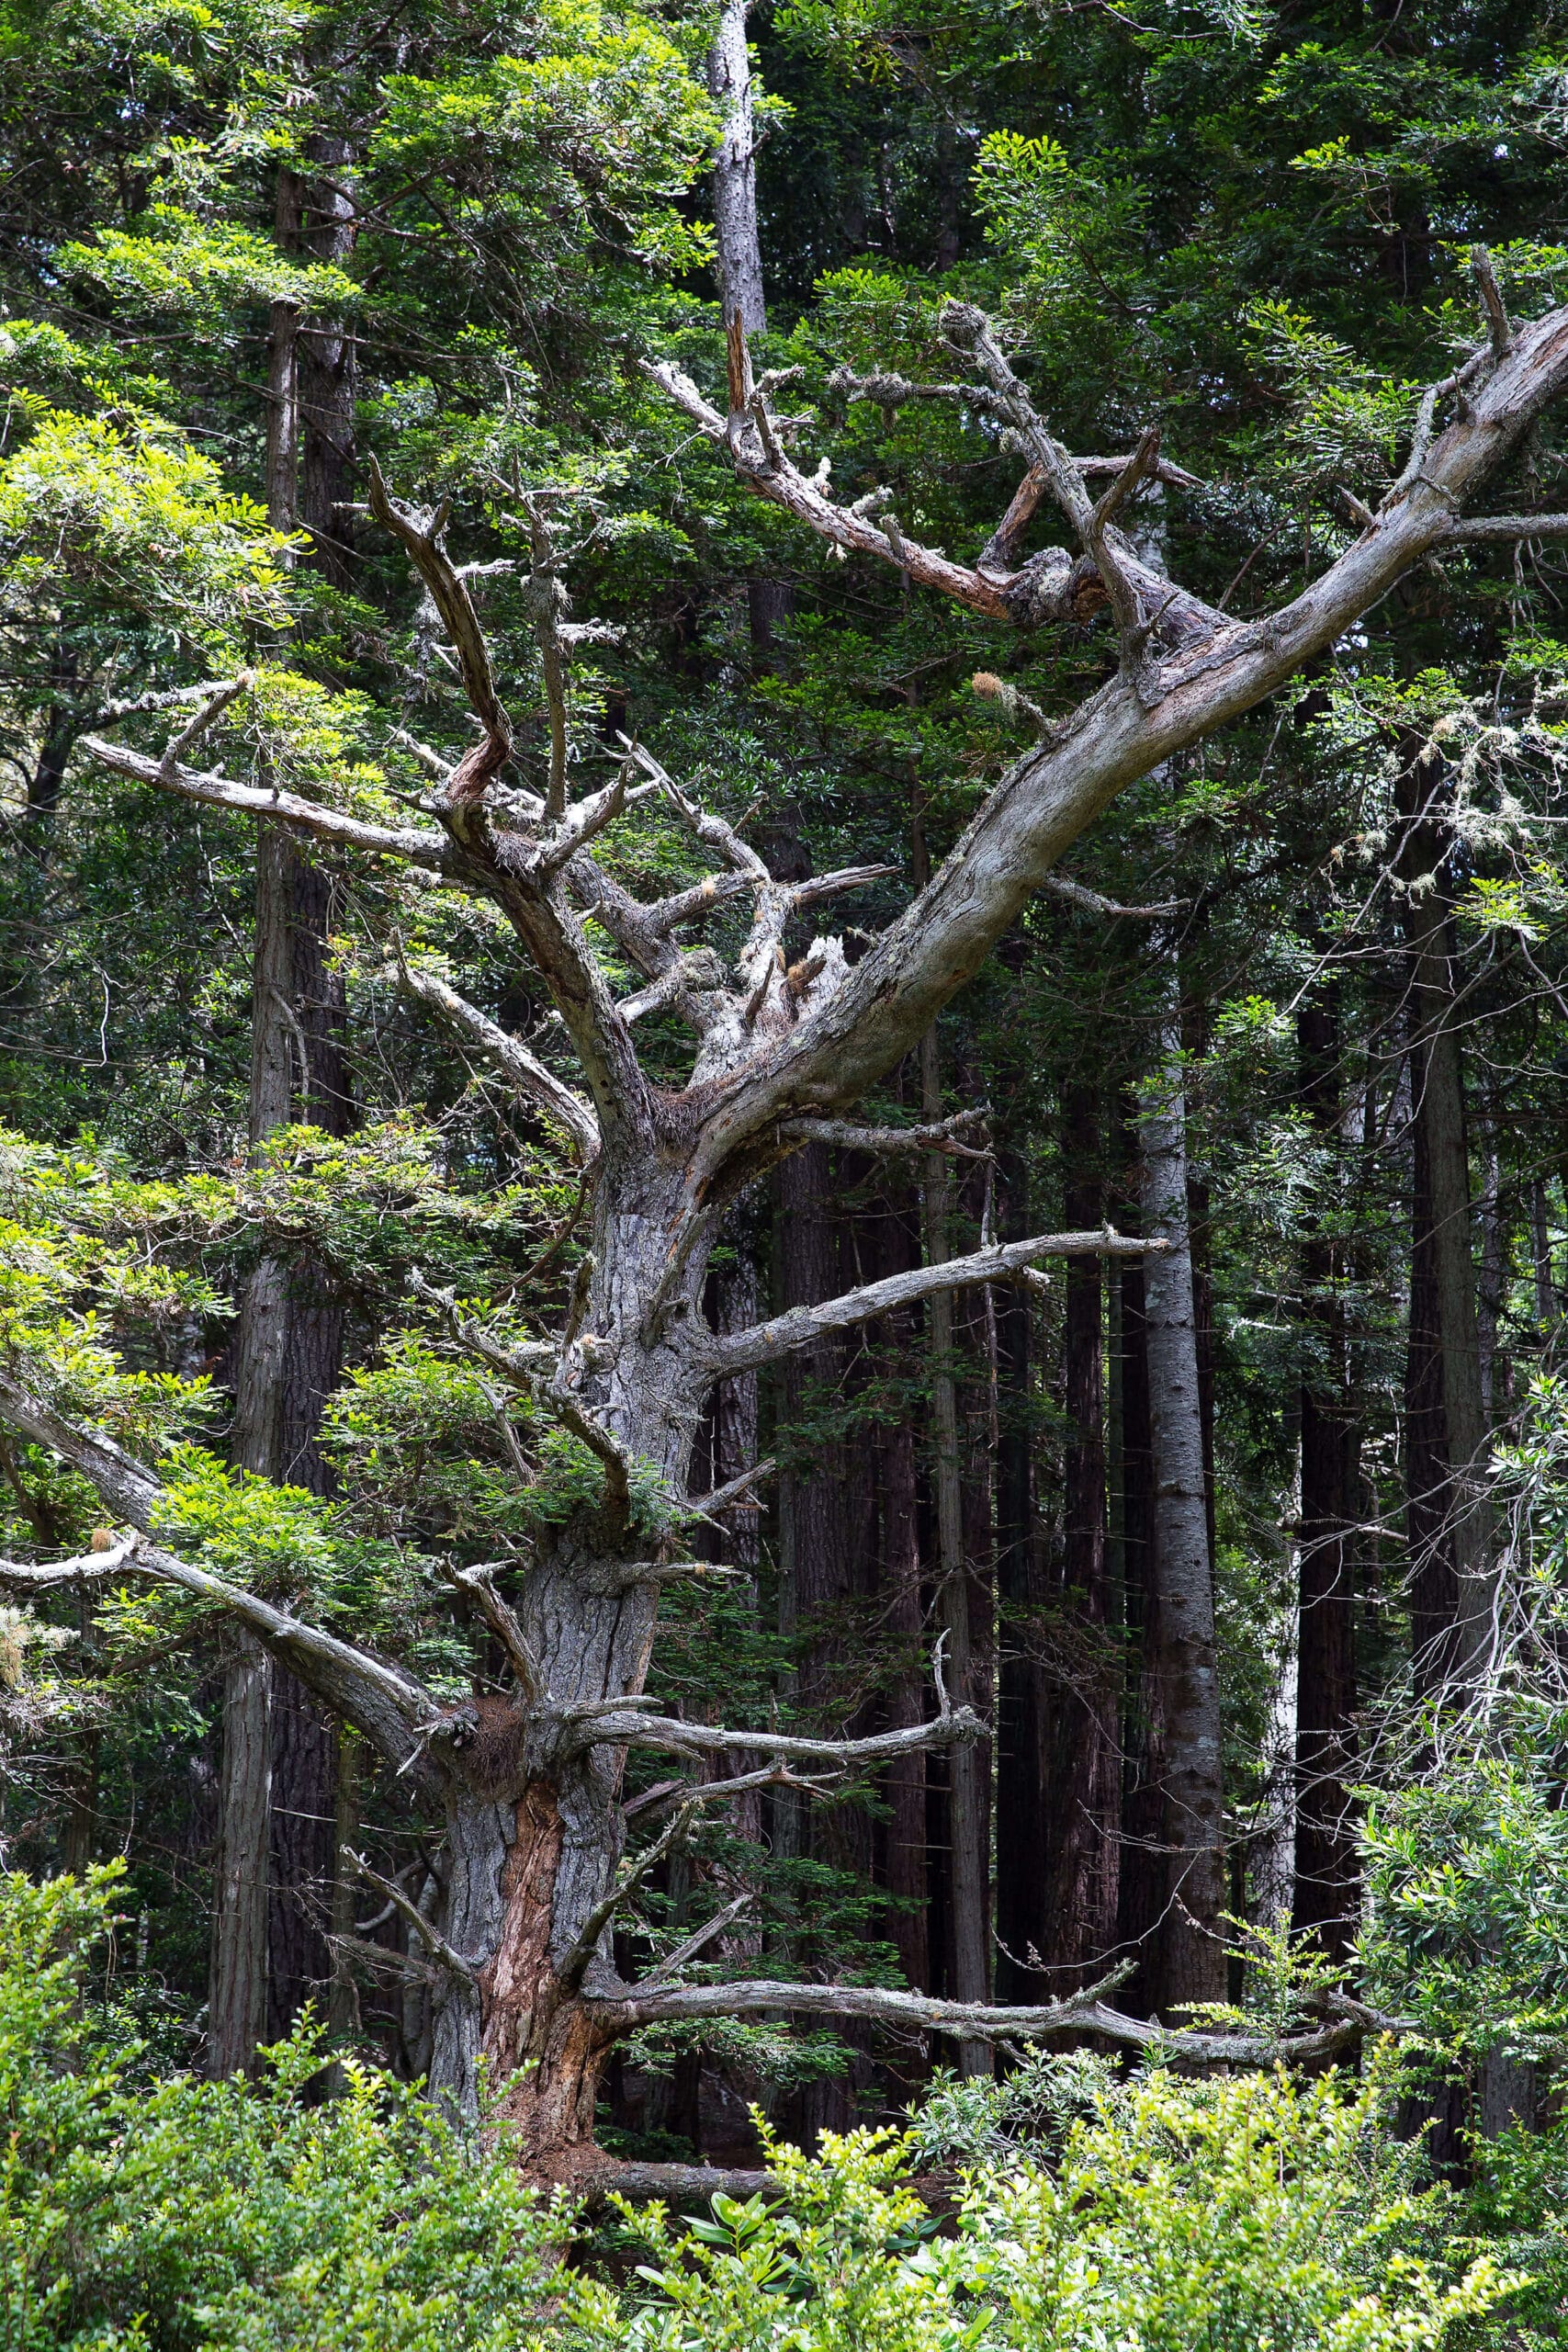 A bald eagle perched on a tree in a forest.